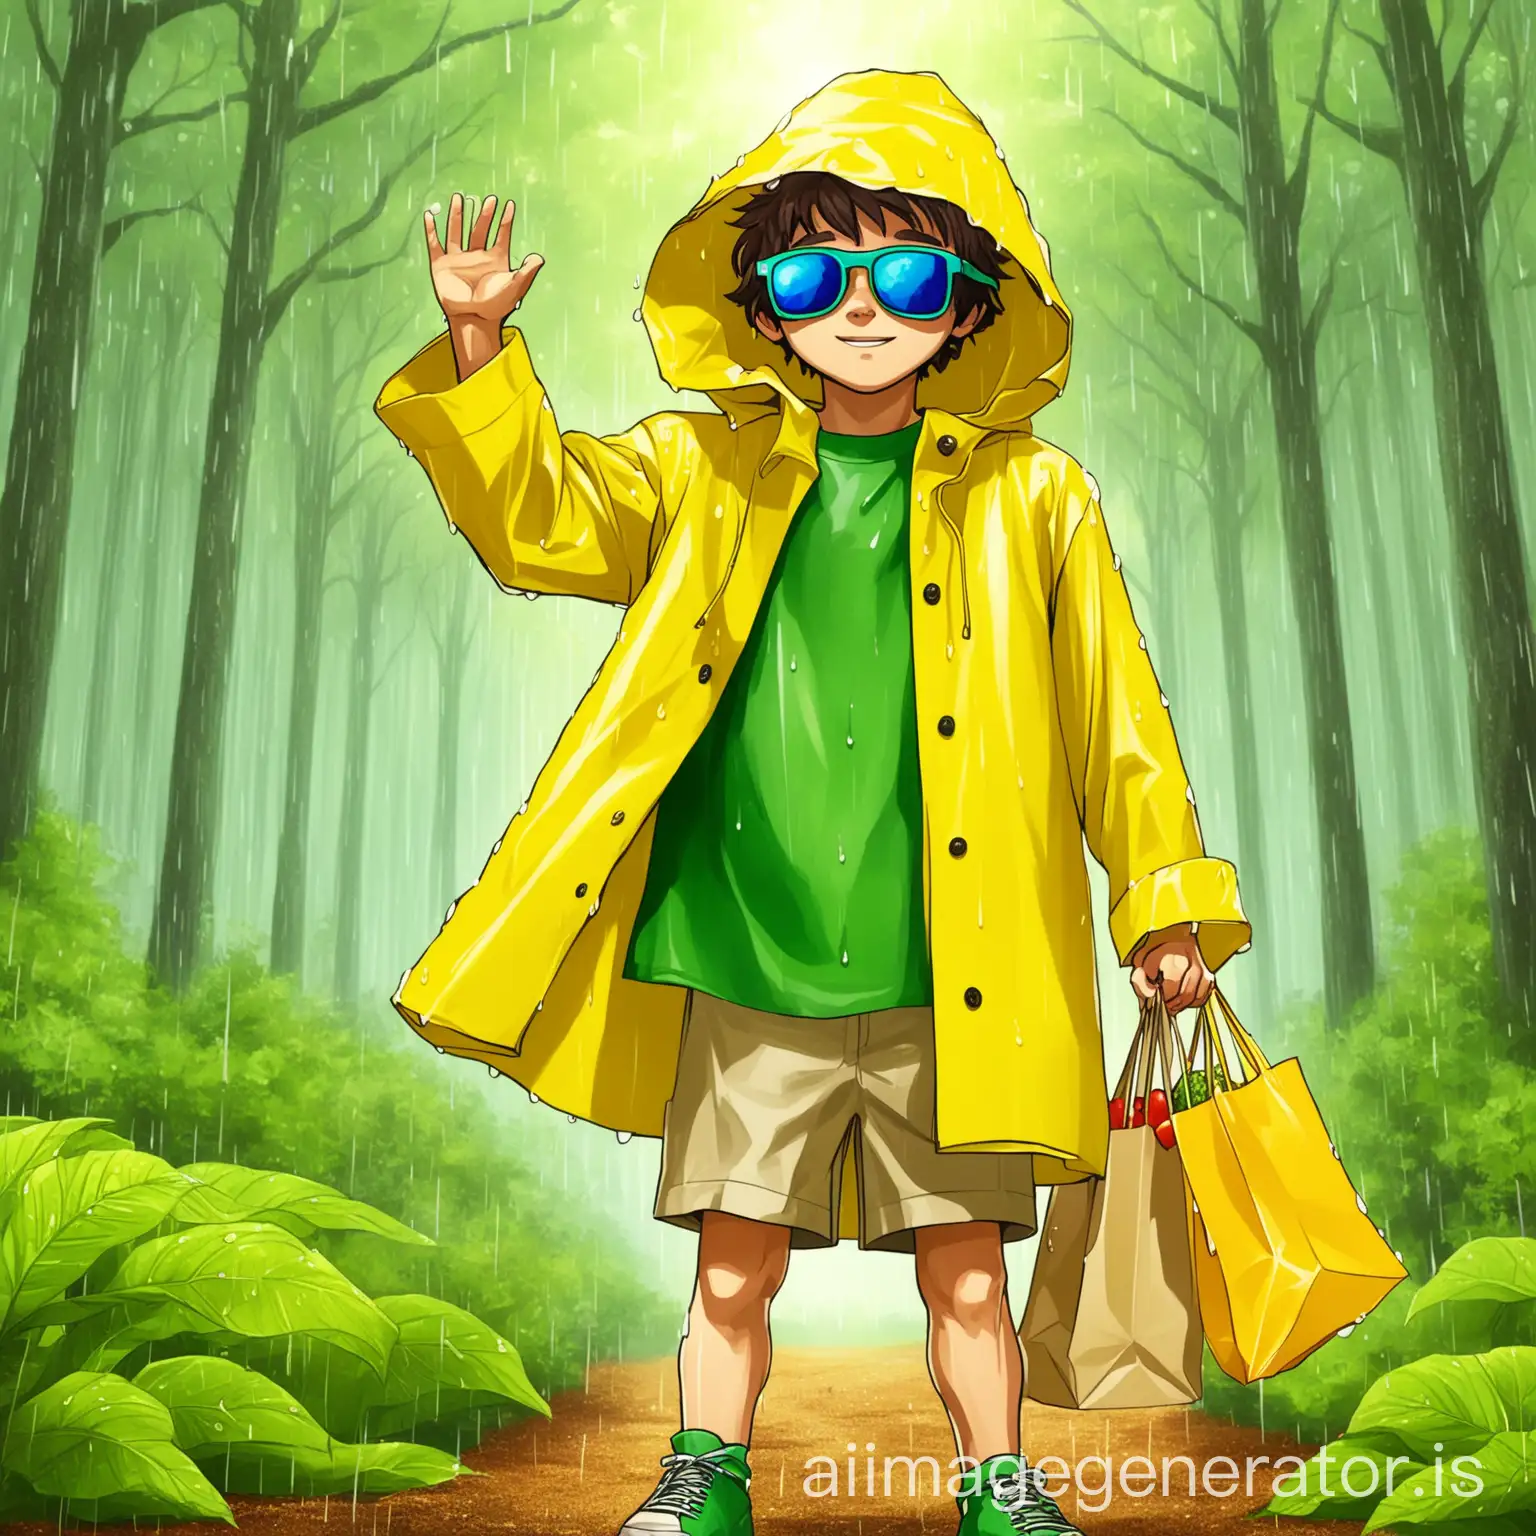 EcoHero-Boy-Standing-in-Clean-Forest-Glade-in-Salty-Costume-and-Yellow-Raincoat-with-EcoShopper-and-EcoSunglasses